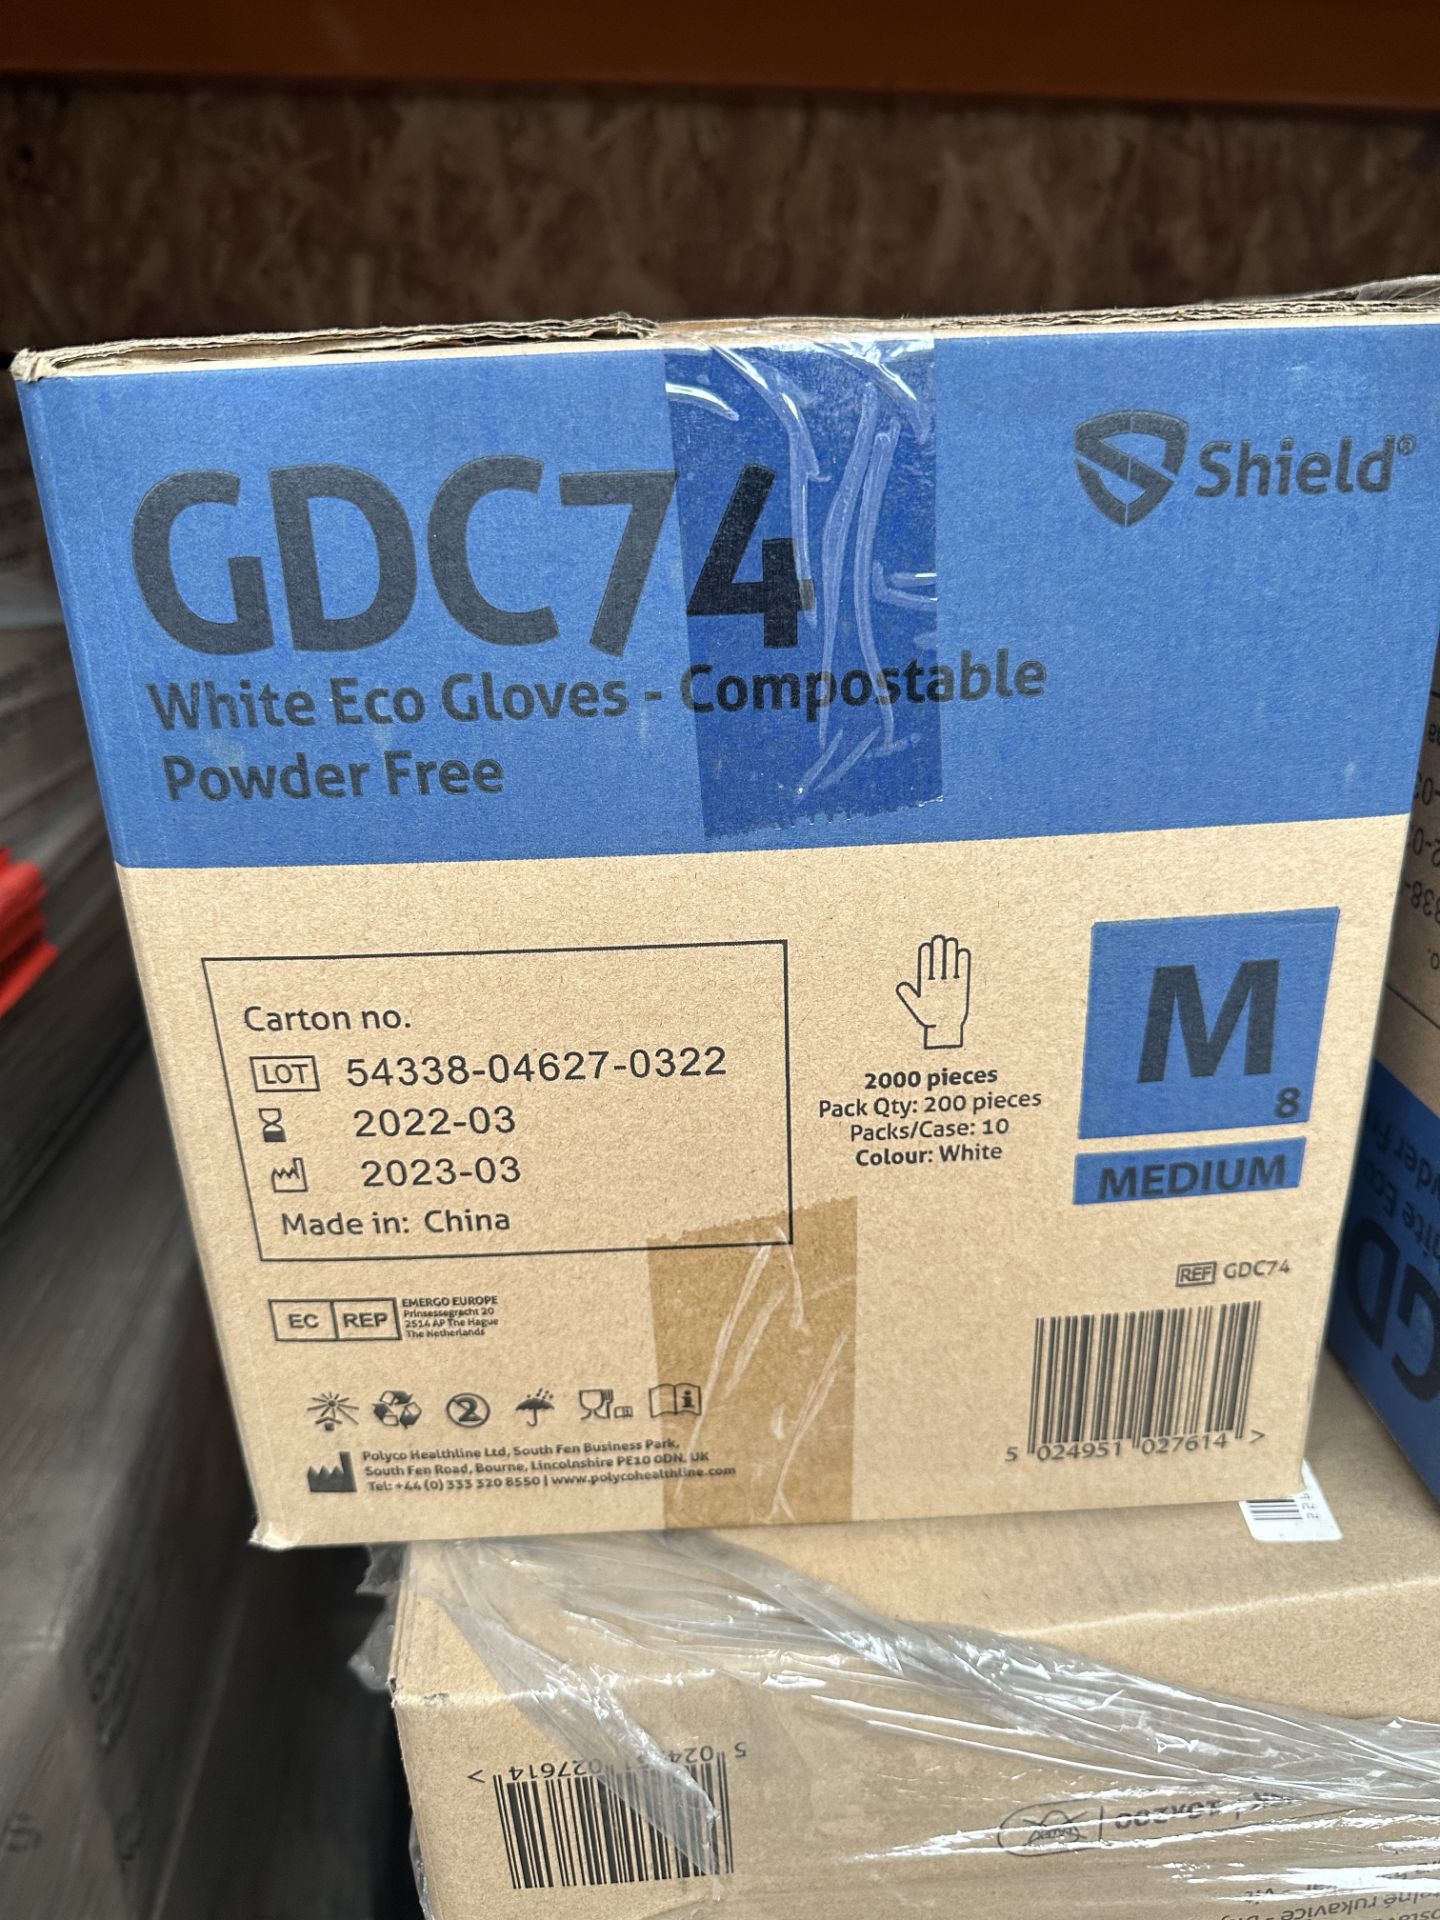 250 BOXES OF 200, SHIELD GDC74 ECO WHITE COMPOSTABLE GLOVES MEDIUM RRP £2500 - Image 2 of 2